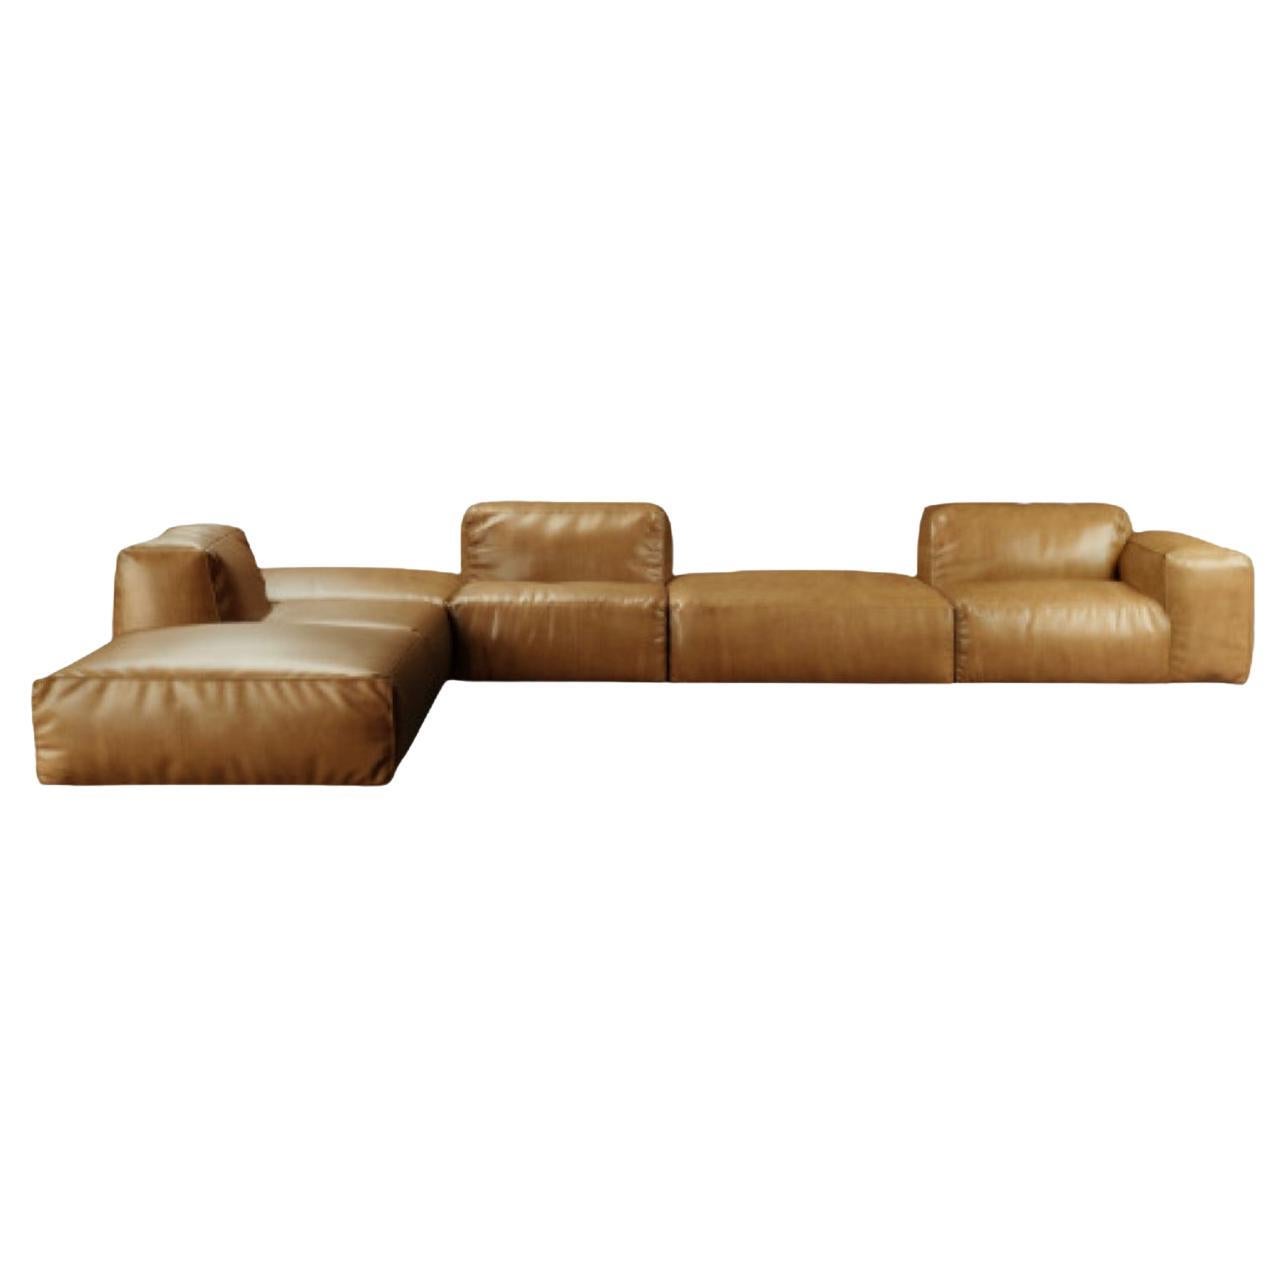 Rencontre Moi Modular Sofa Touch Sella Leather For Sale